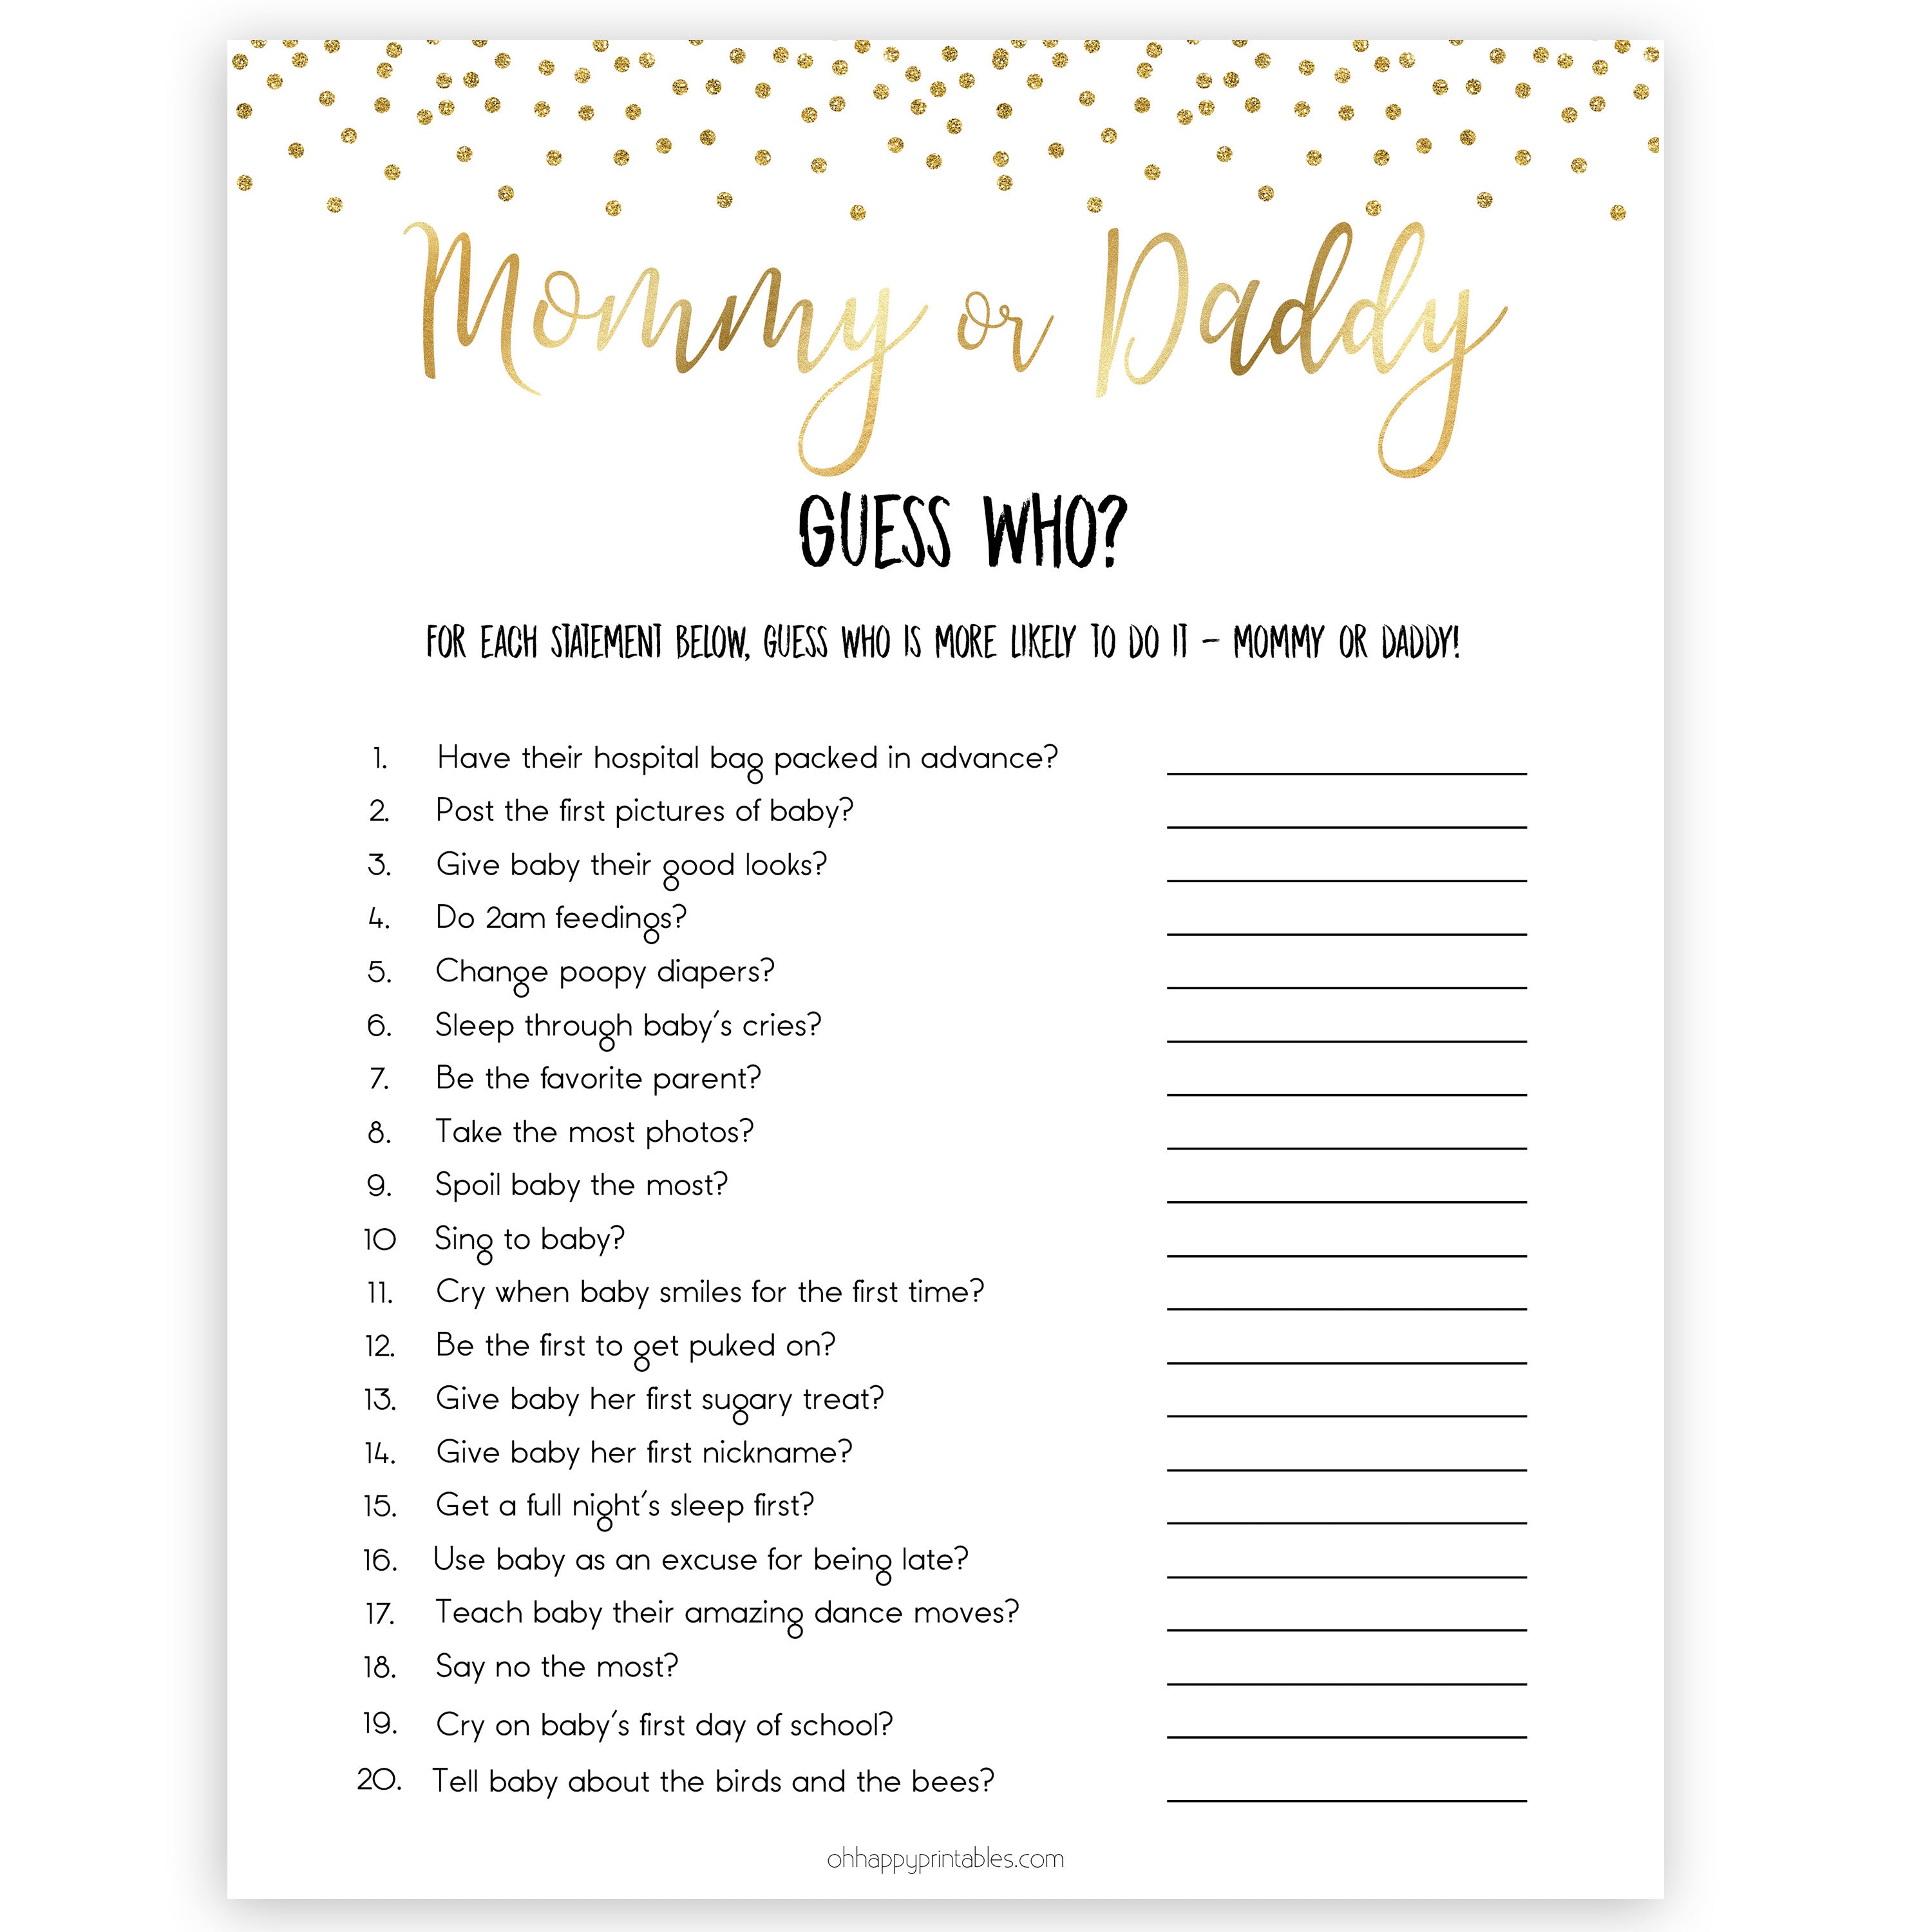 gold baby shower games, guess who, mommy or daddy games, printable baby games, fun baby games, popular baby games, baby shower games, gold baby games, print baby games, gold baby shower